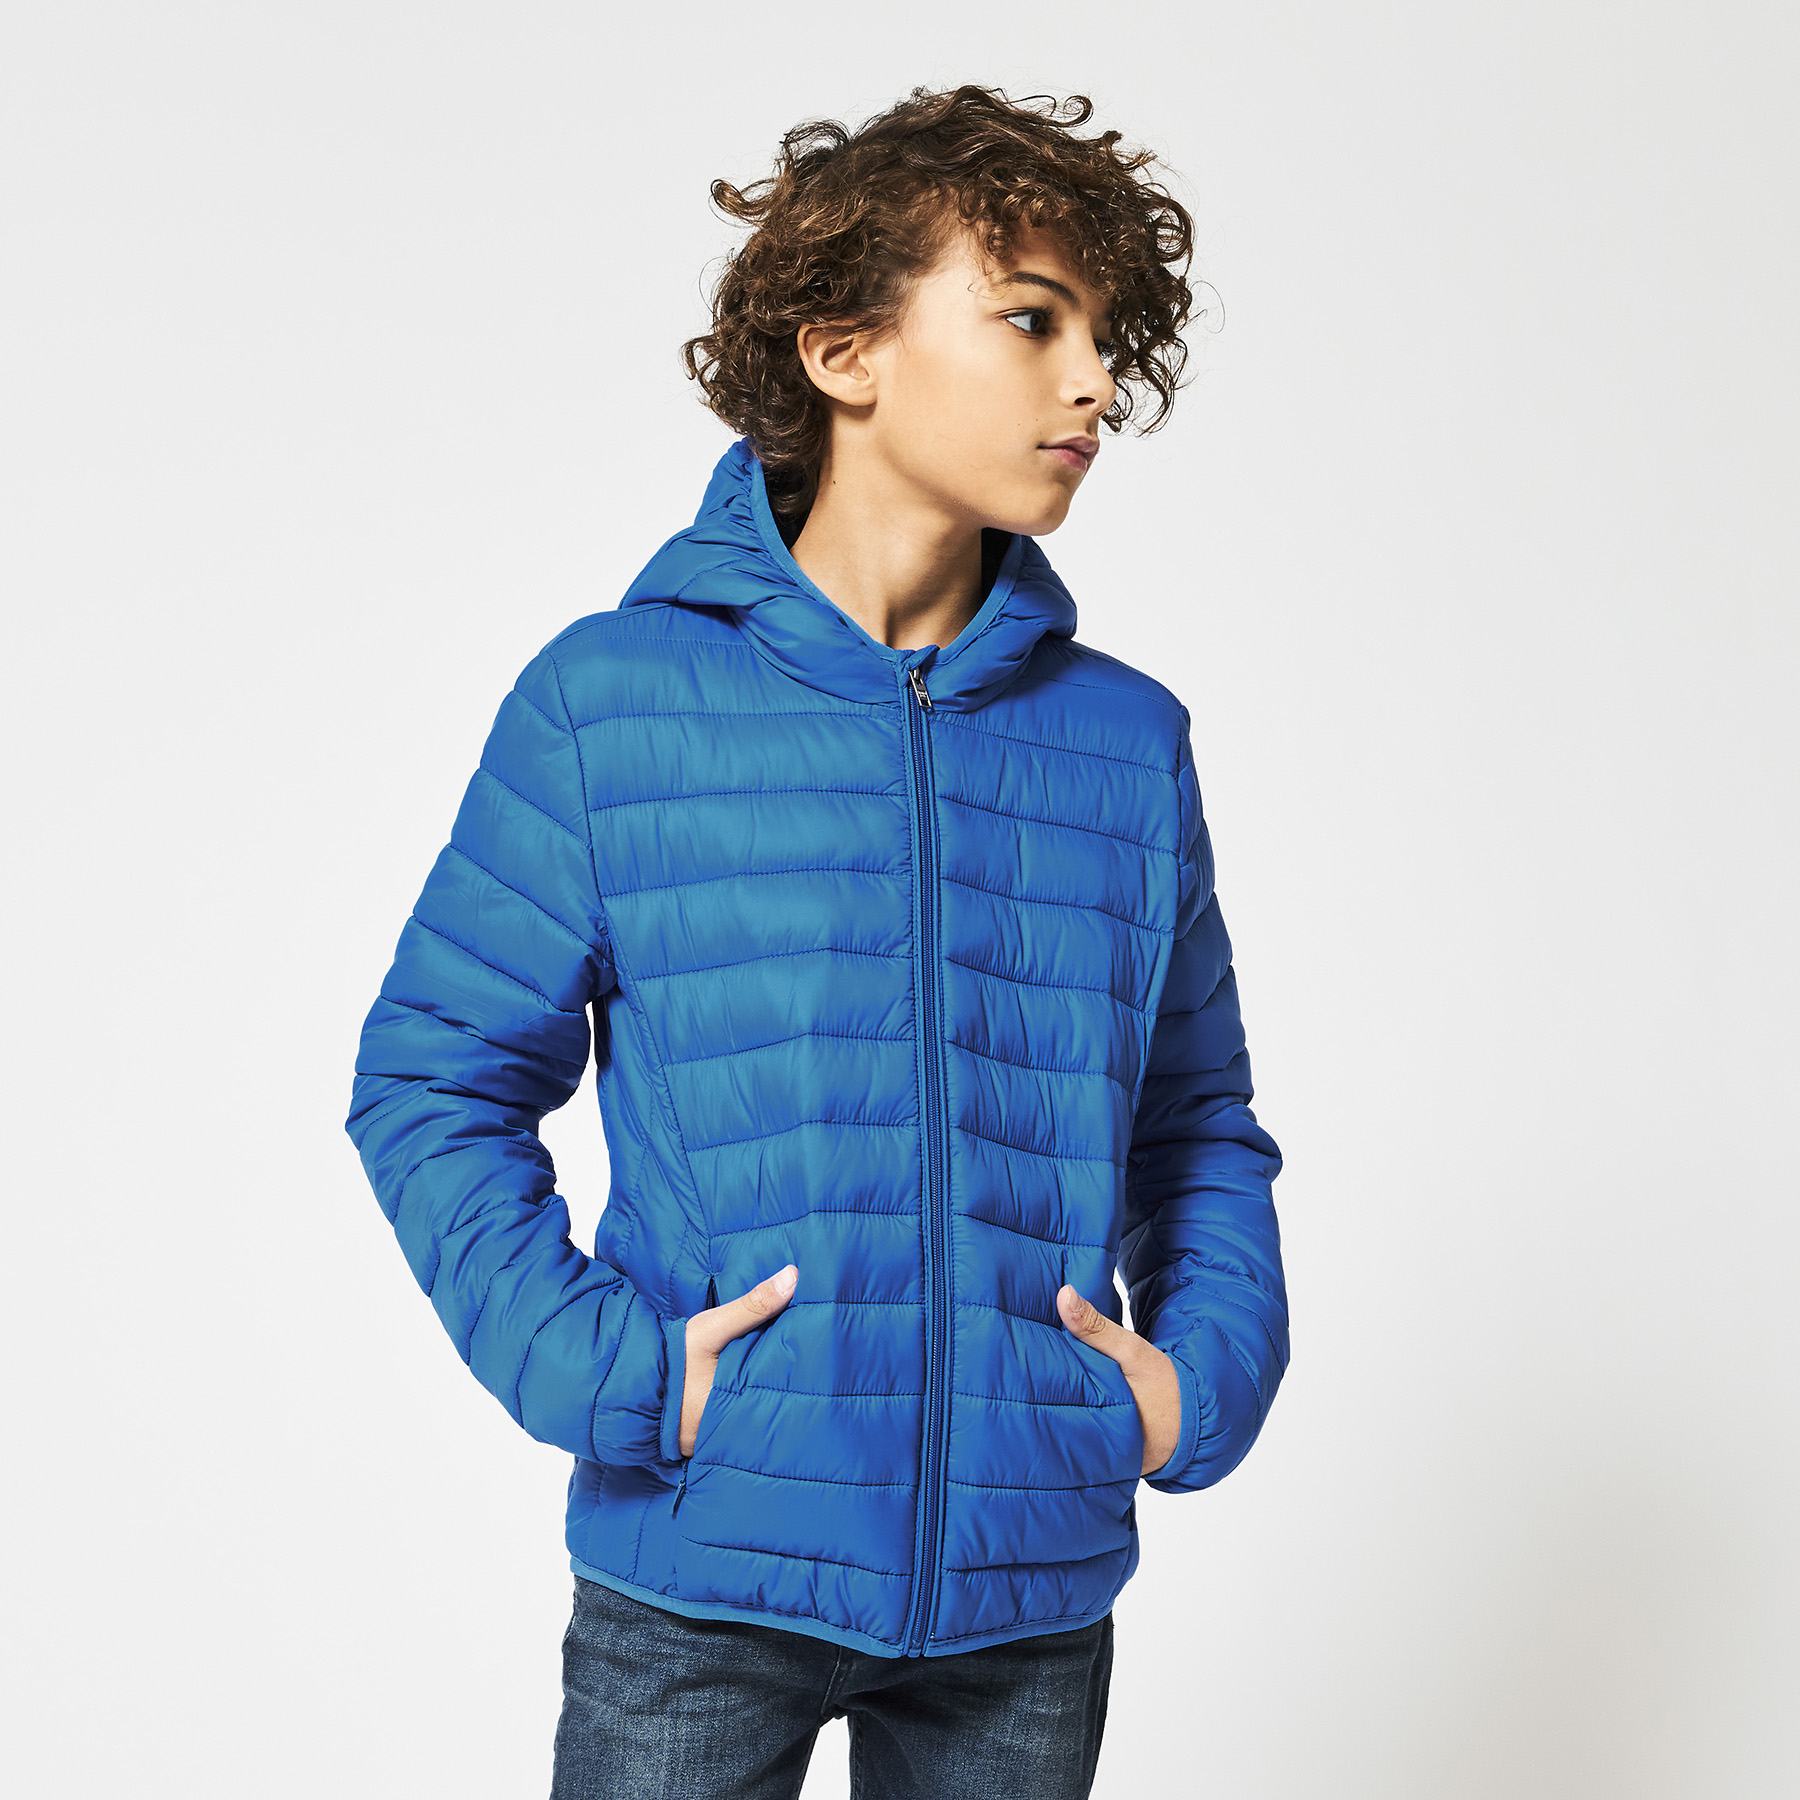 Boys Padded jacket with hood Blue Buy Online